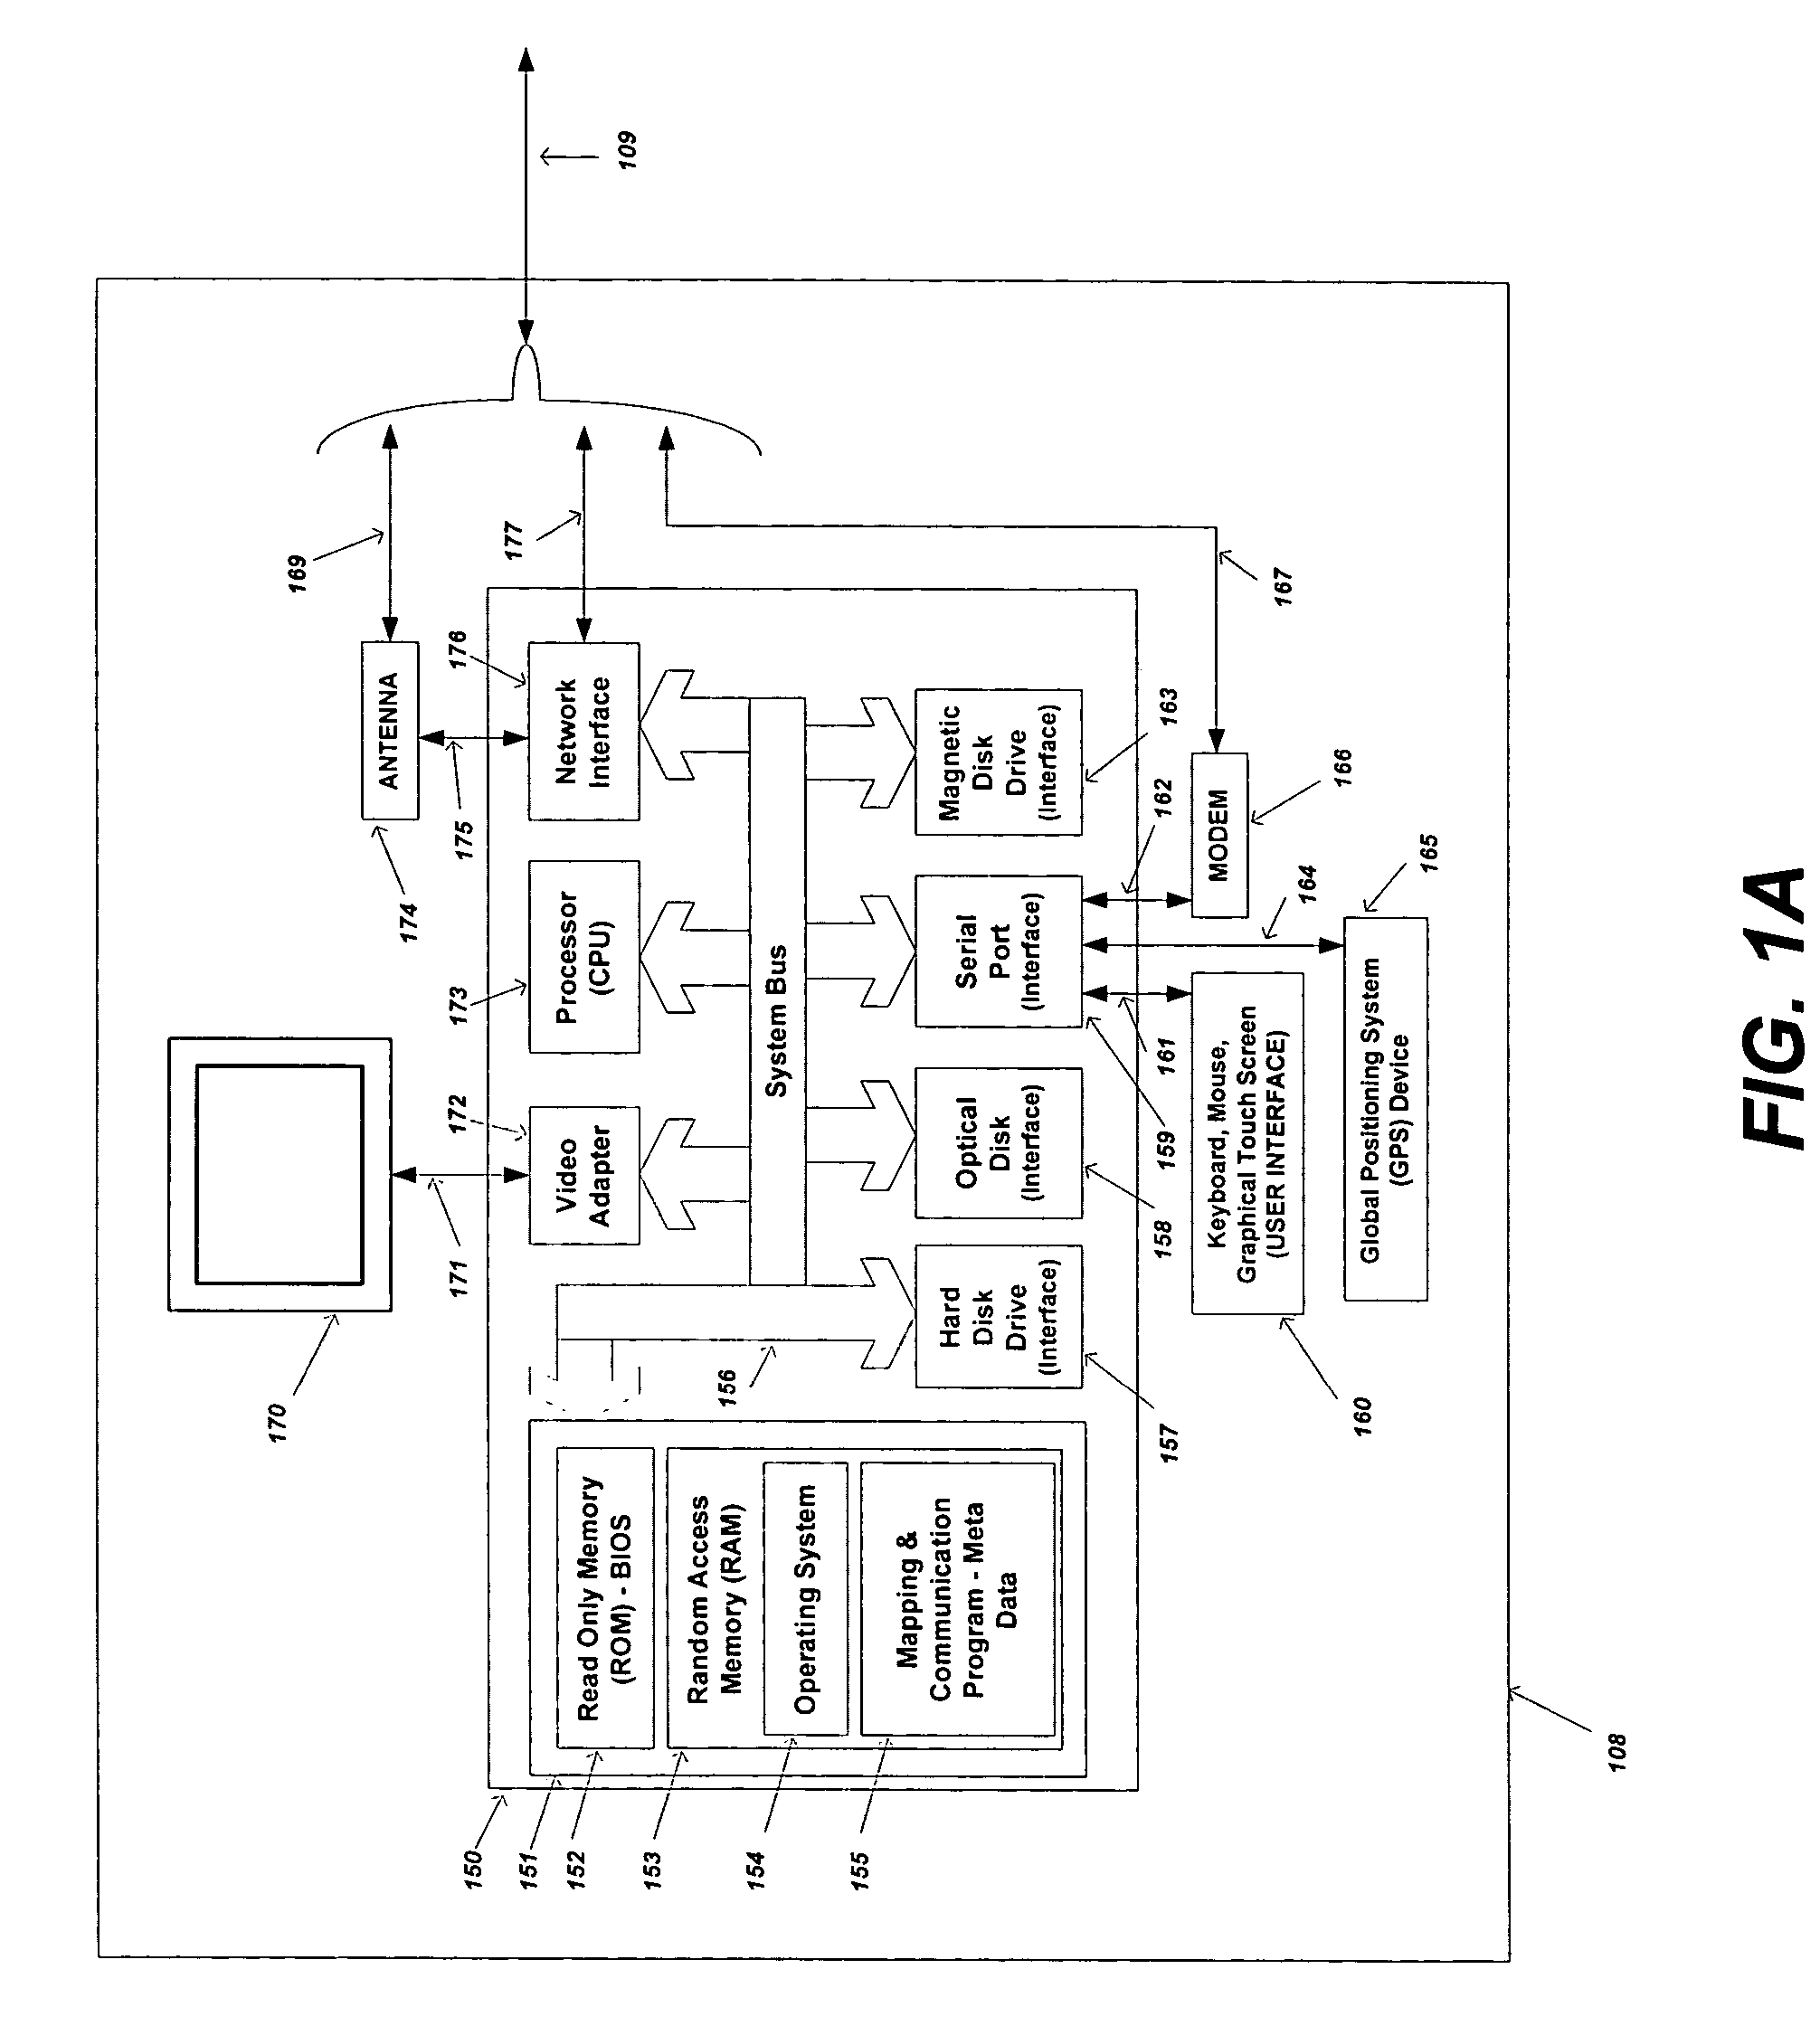 Method and system for saving and retrieving spatial related information